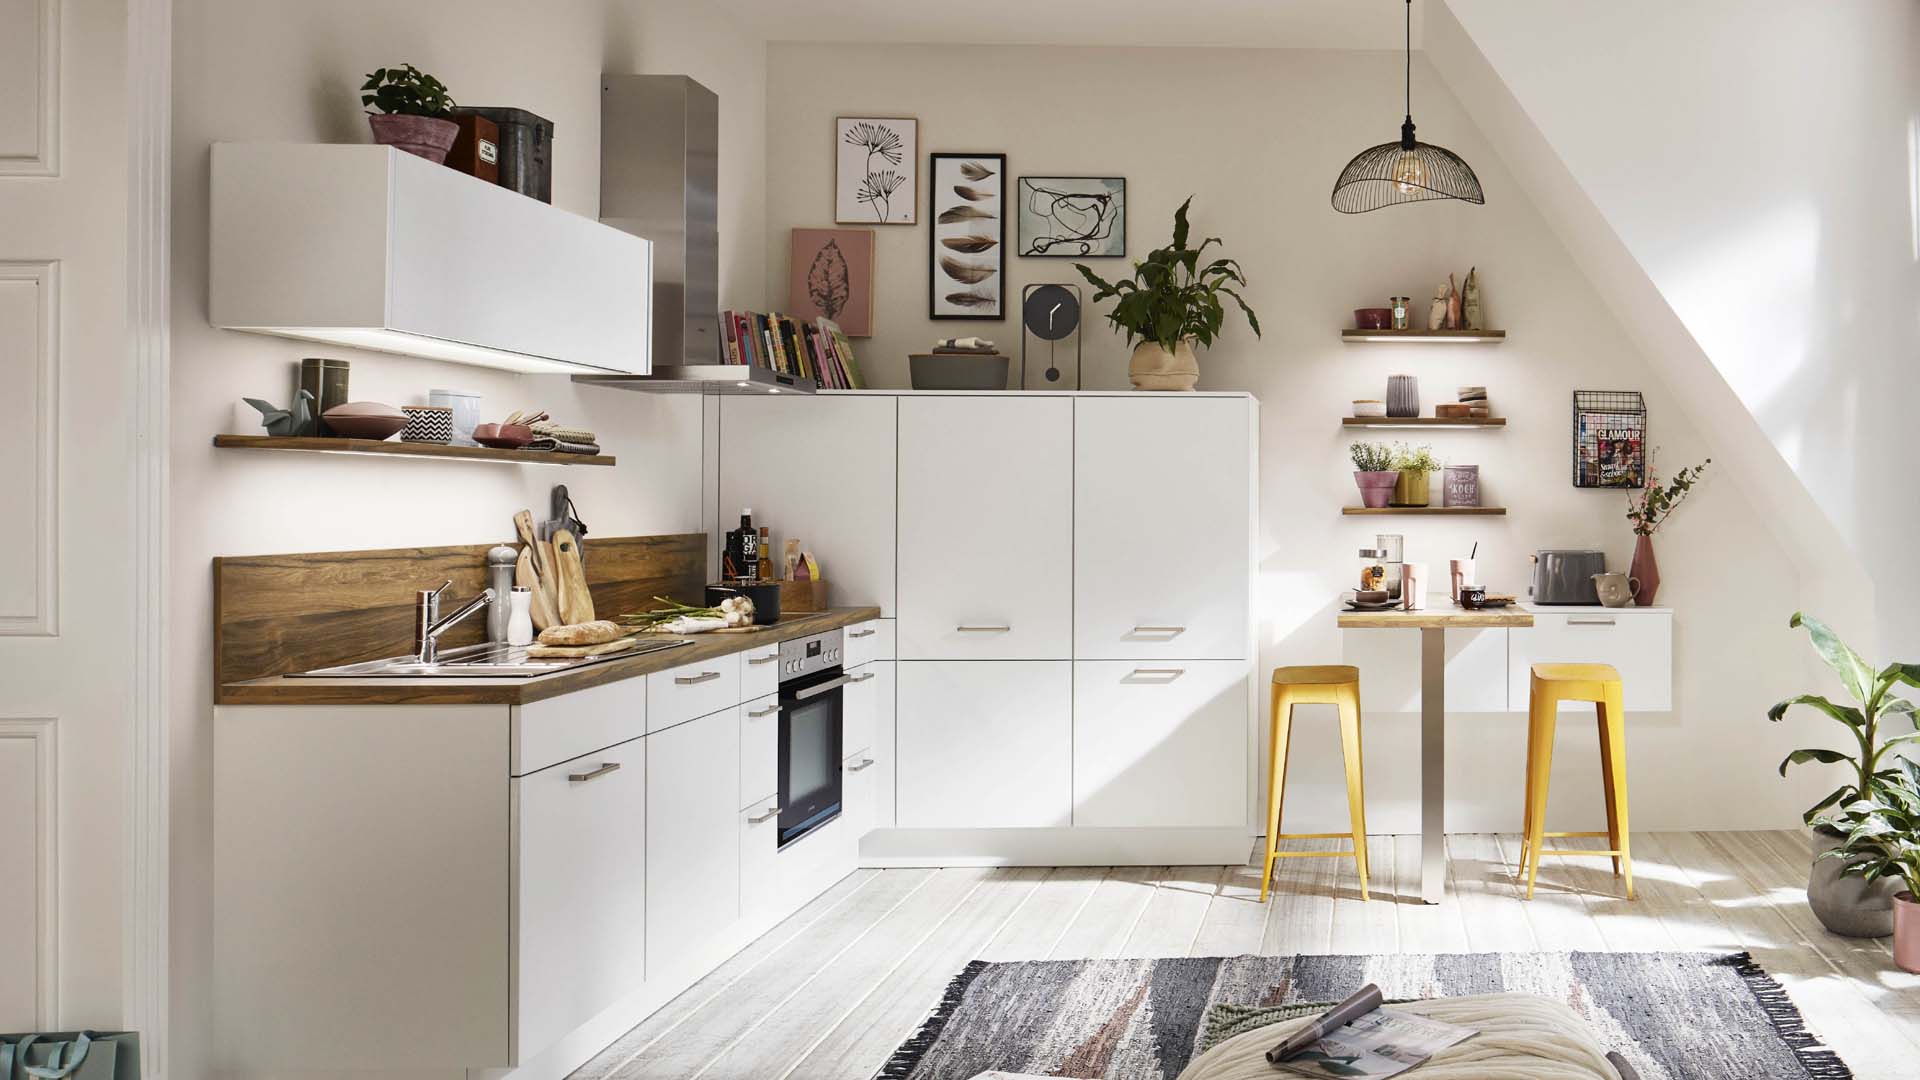 A white airy kitchen with a slanted ceiling